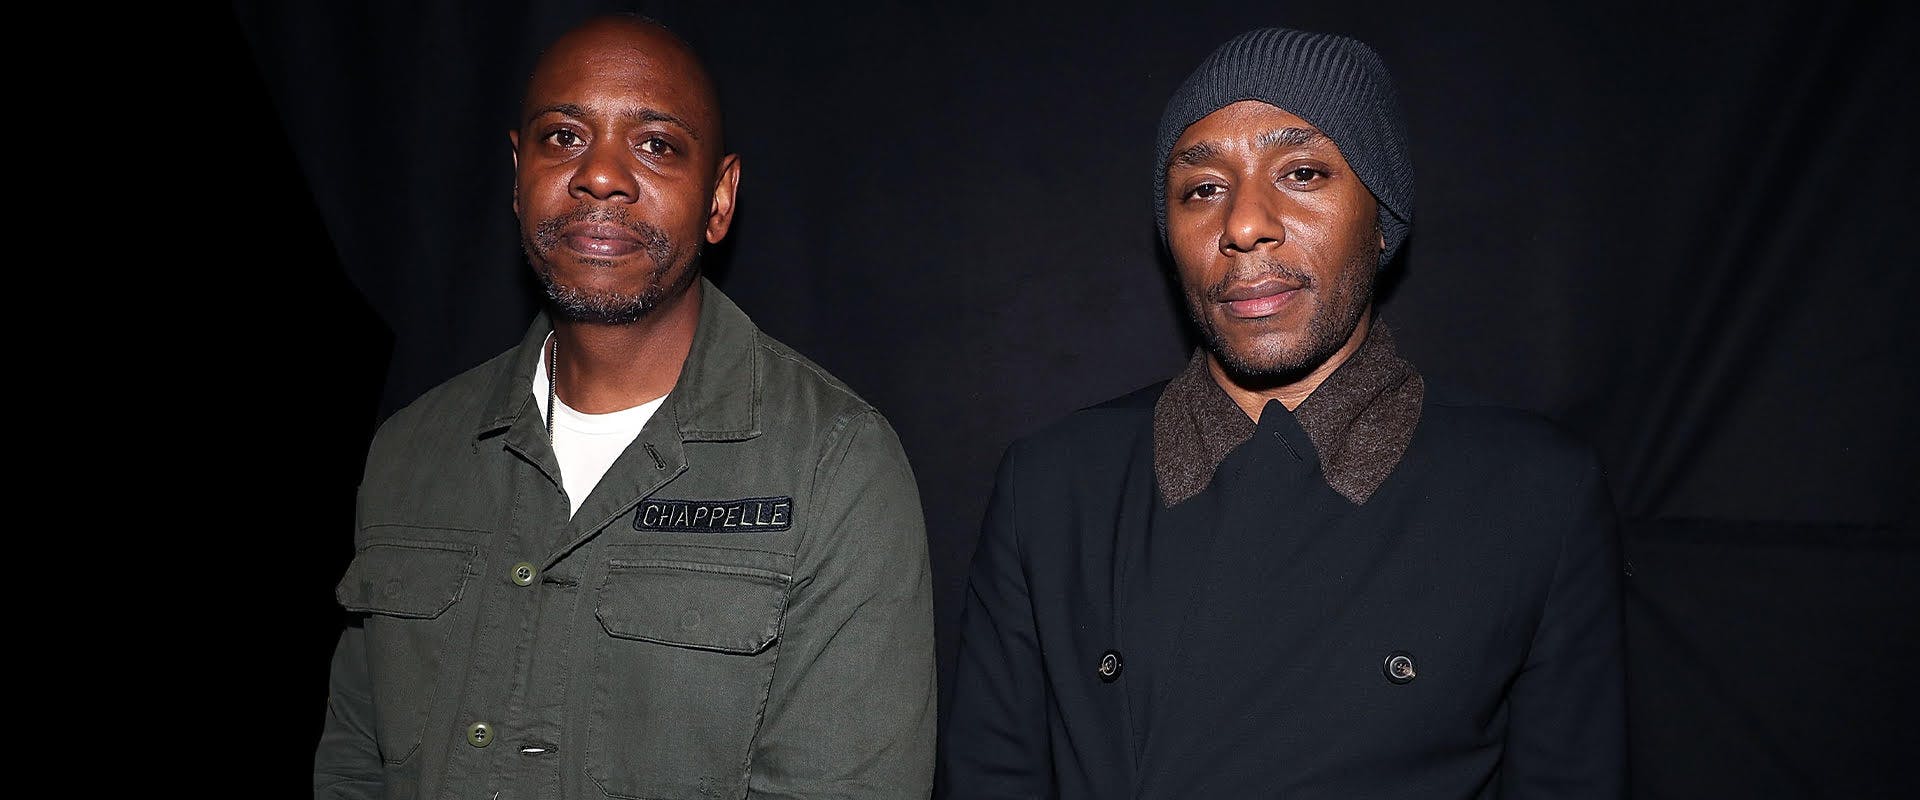 Dave Chappelle and Mos Def attend Jay-Z Performs At Webster Hall - Backstage at Webster Hall on April 26, 2019 in New York City